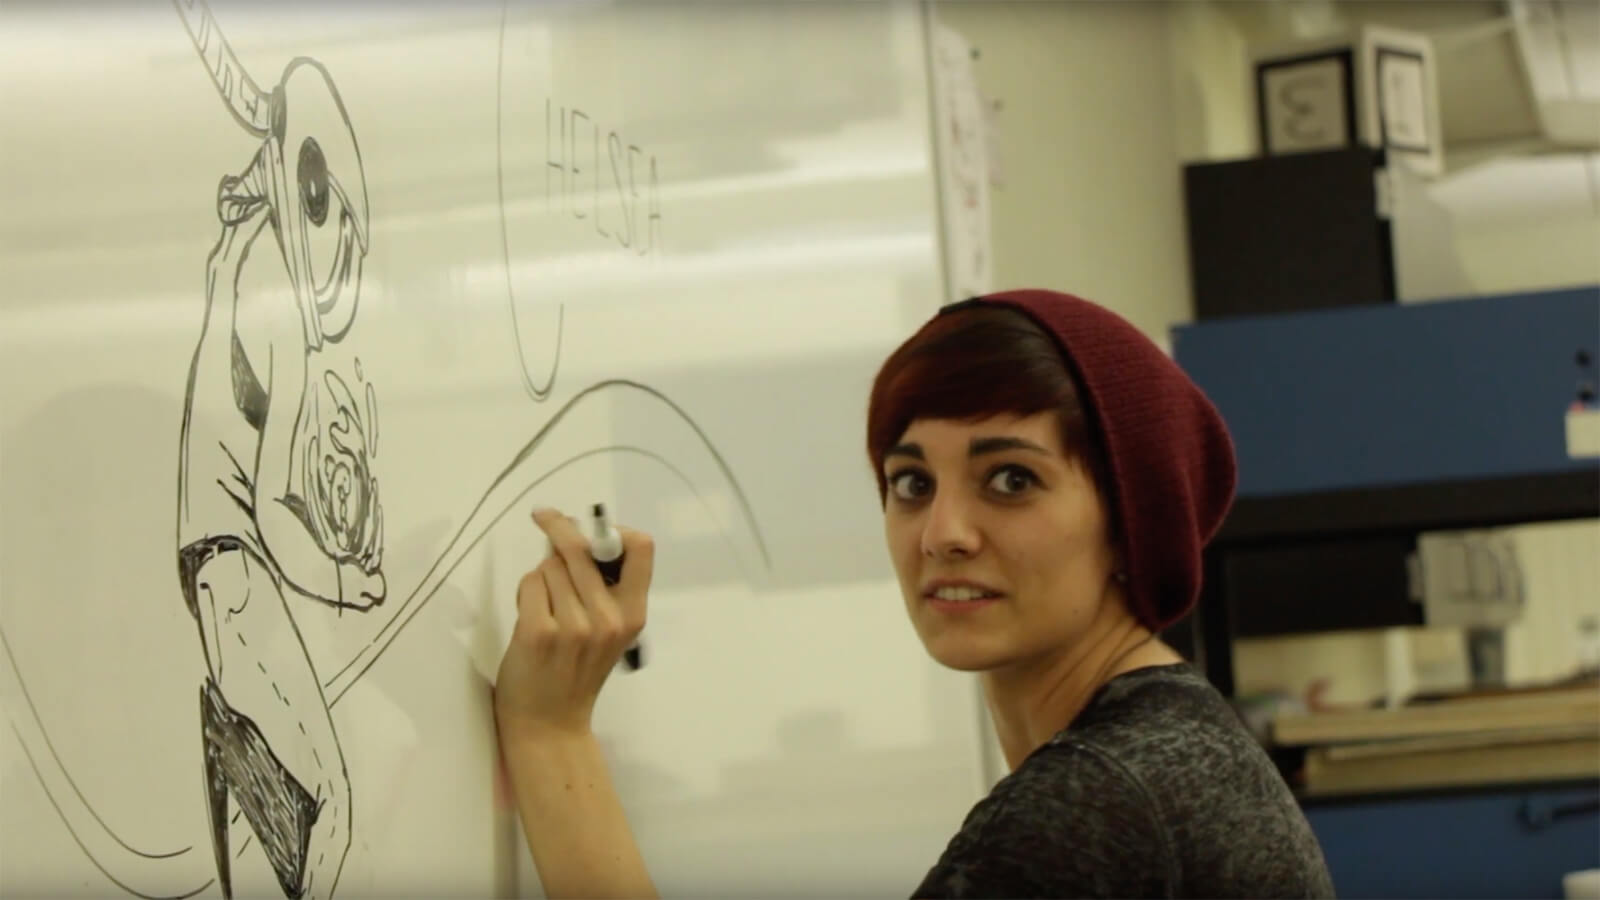 A design student draws an illustration on the whiteboard